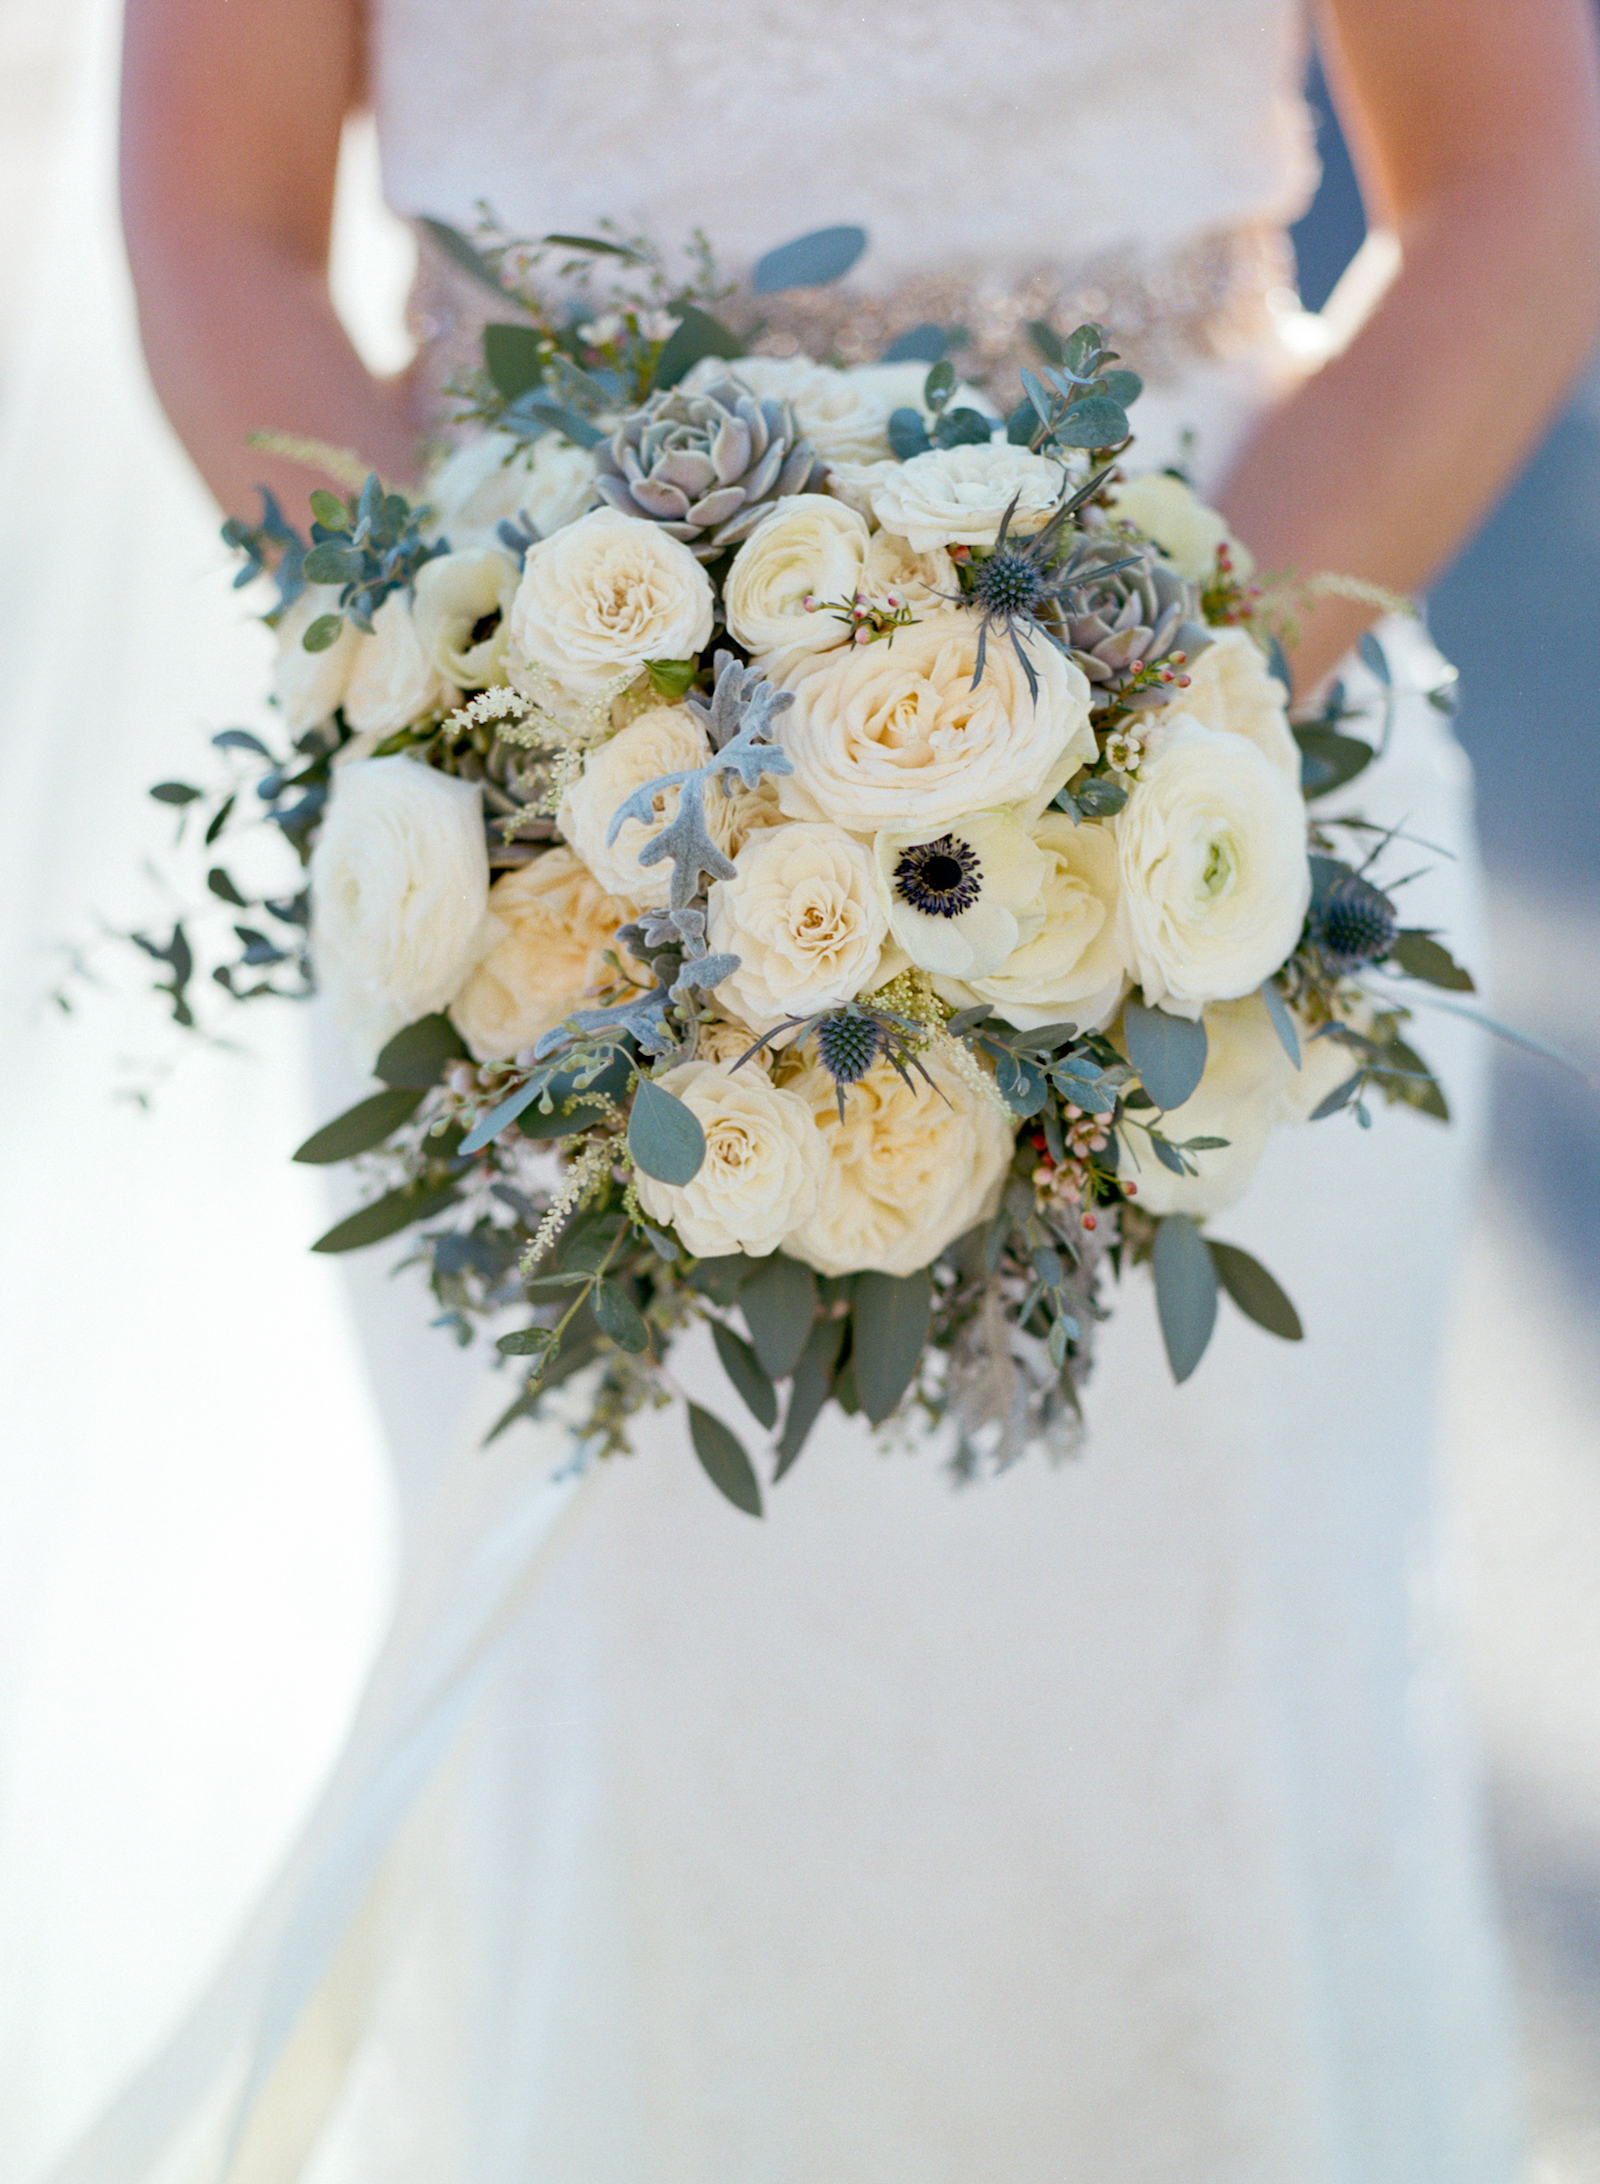 Lush bridal bouquet with all white flowers and anemones